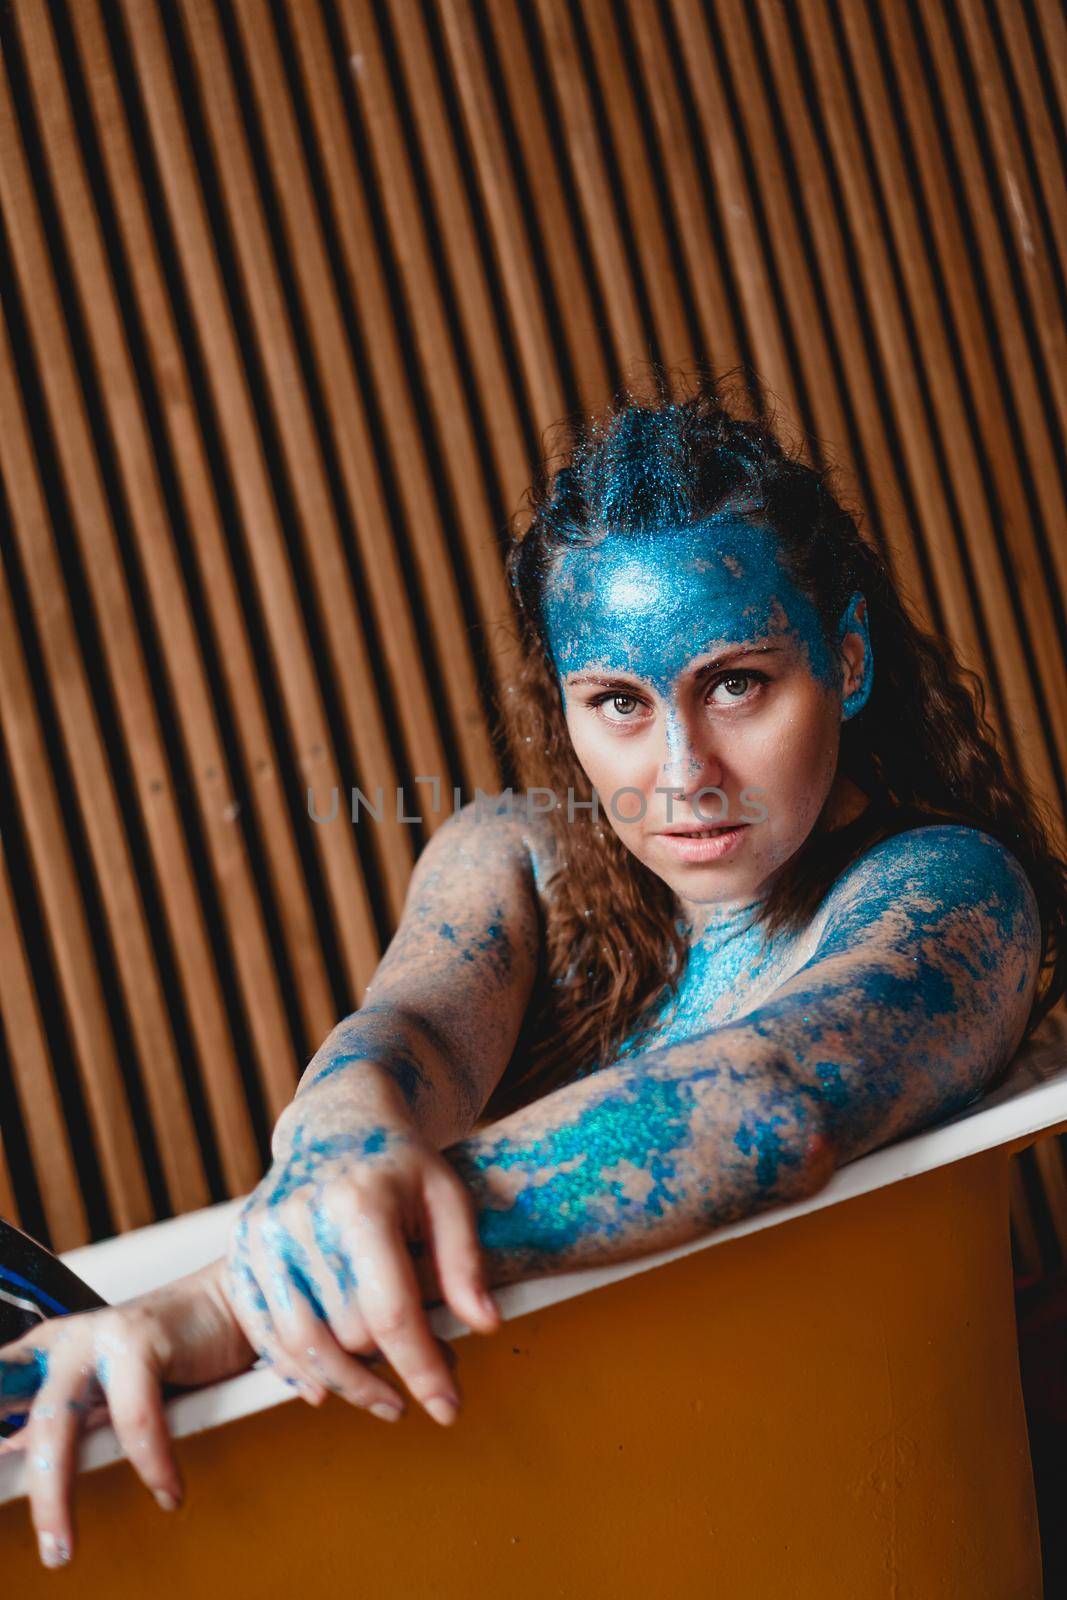 Portrait of beautiful woman with blue sparkles on her face in the bath. The concept of Individuality